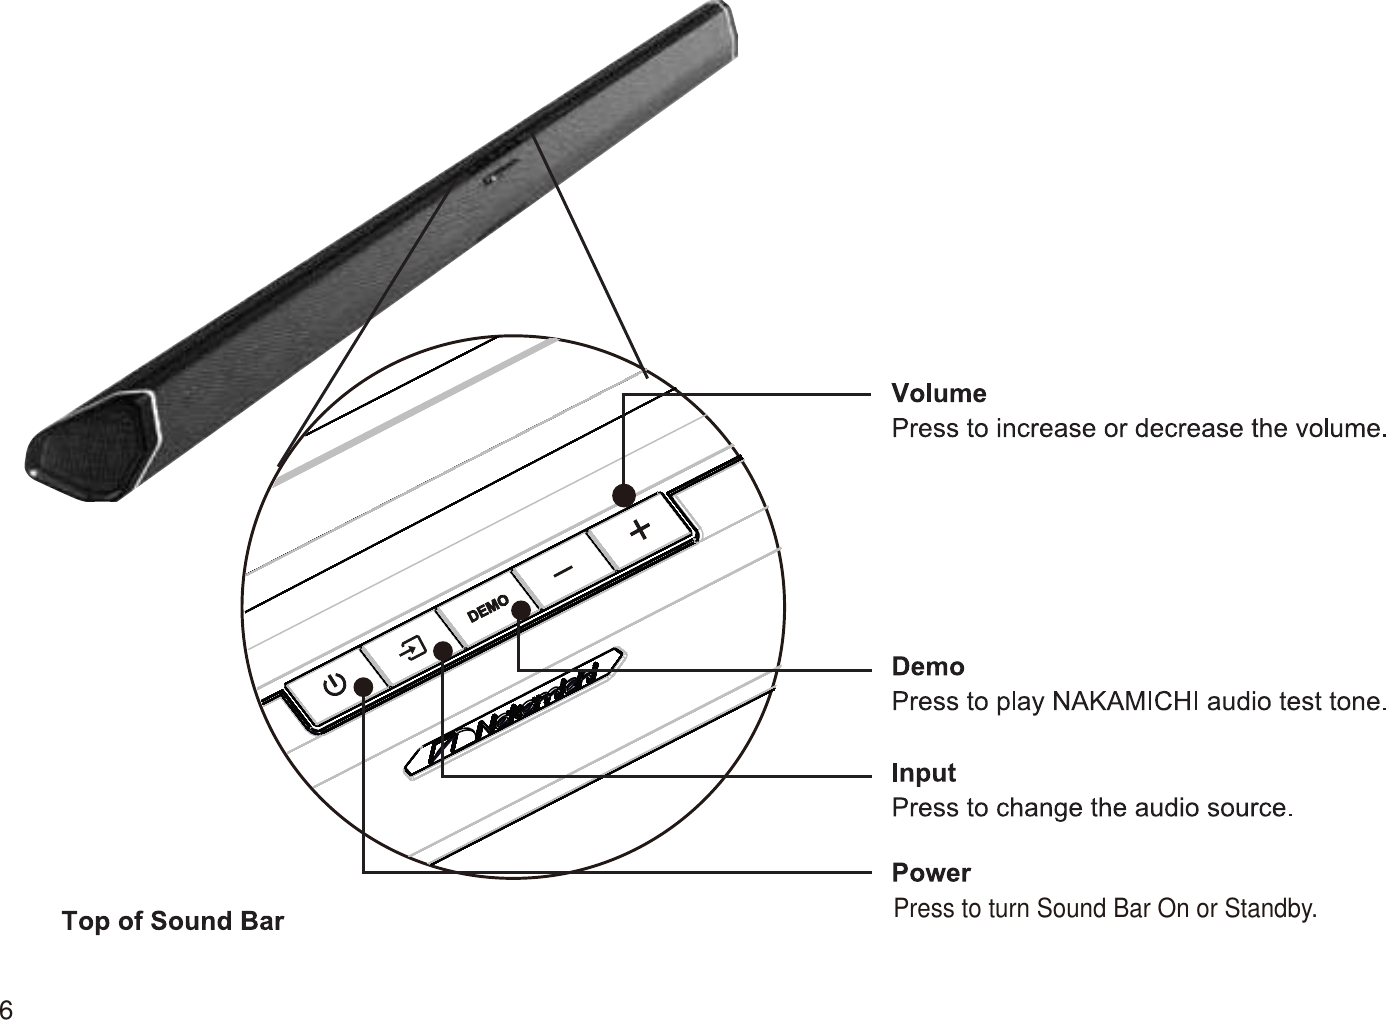 Press to turn Sound Bar On or Standby.6